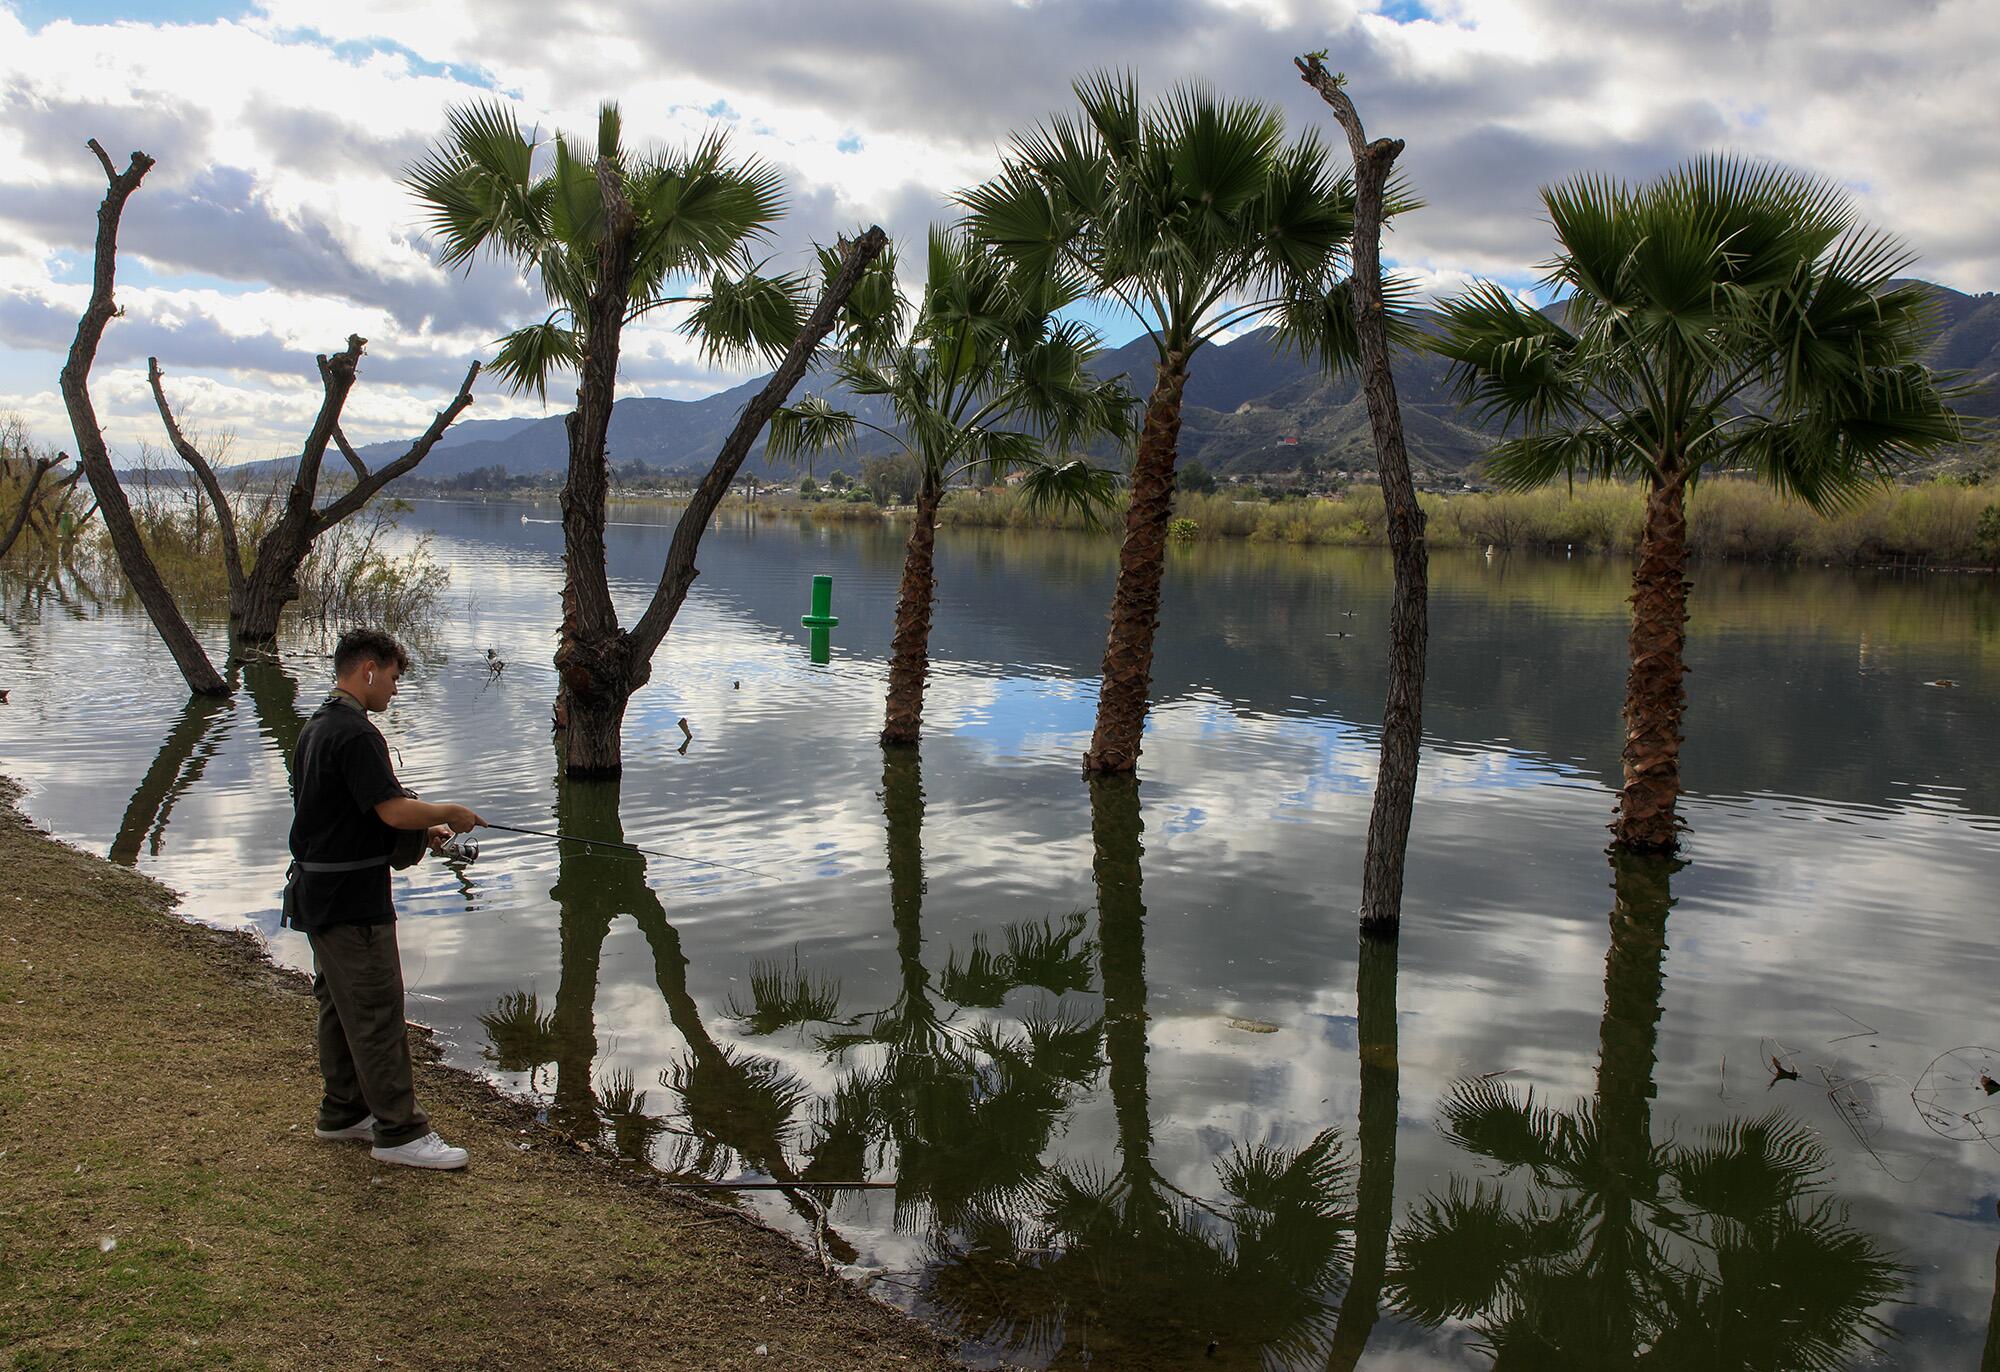 The palm trees at the Elsinore West Marina at Lake Elsinore are now under water.